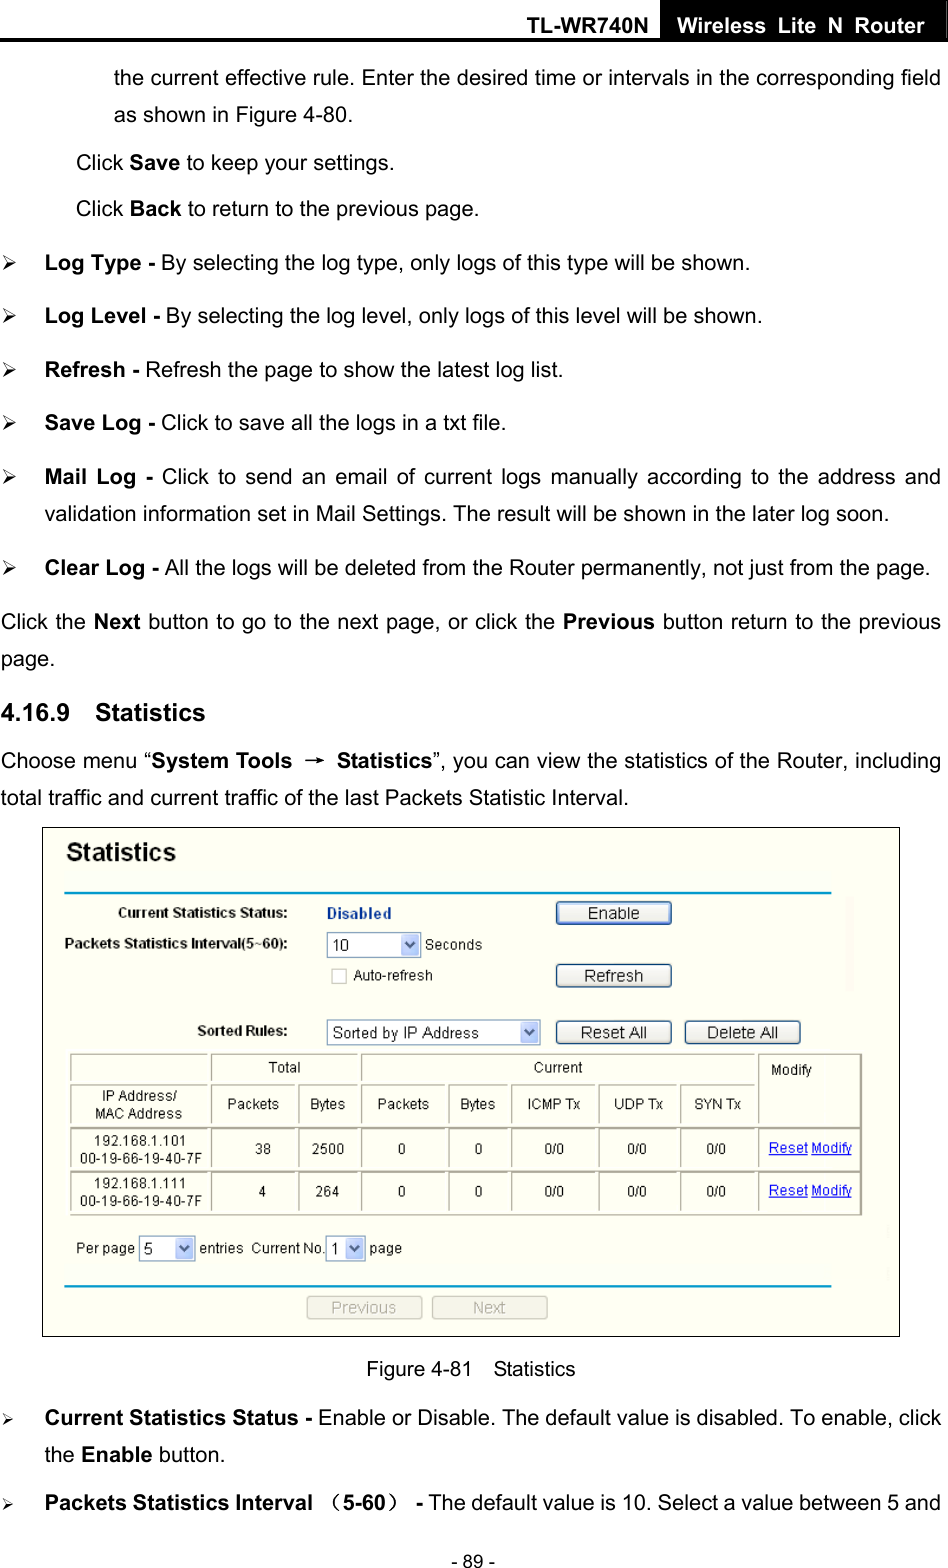 TL-WR740N Wireless Lite N Router  - 89 - the current effective rule. Enter the desired time or intervals in the corresponding field as shown in Figure 4-80. Click Save to keep your settings. Click Back to return to the previous page. ¾ Log Type - By selecting the log type, only logs of this type will be shown.   ¾ Log Level - By selecting the log level, only logs of this level will be shown.   ¾ Refresh - Refresh the page to show the latest log list.   ¾ Save Log - Click to save all the logs in a txt file.   ¾ Mail Log - Click to send an email of current logs manually according to the address and validation information set in Mail Settings. The result will be shown in the later log soon.   ¾ Clear Log - All the logs will be deleted from the Router permanently, not just from the page.   Click the Next button to go to the next page, or click the Previous button return to the previous page. 4.16.9  Statistics Choose menu “System Tools  → Statistics”, you can view the statistics of the Router, including total traffic and current traffic of the last Packets Statistic Interval.  Figure 4-81  Statistics ¾ Current Statistics Status - Enable or Disable. The default value is disabled. To enable, click the Enable button.   ¾ Packets Statistics Interval （5-60） - The default value is 10. Select a value between 5 and 